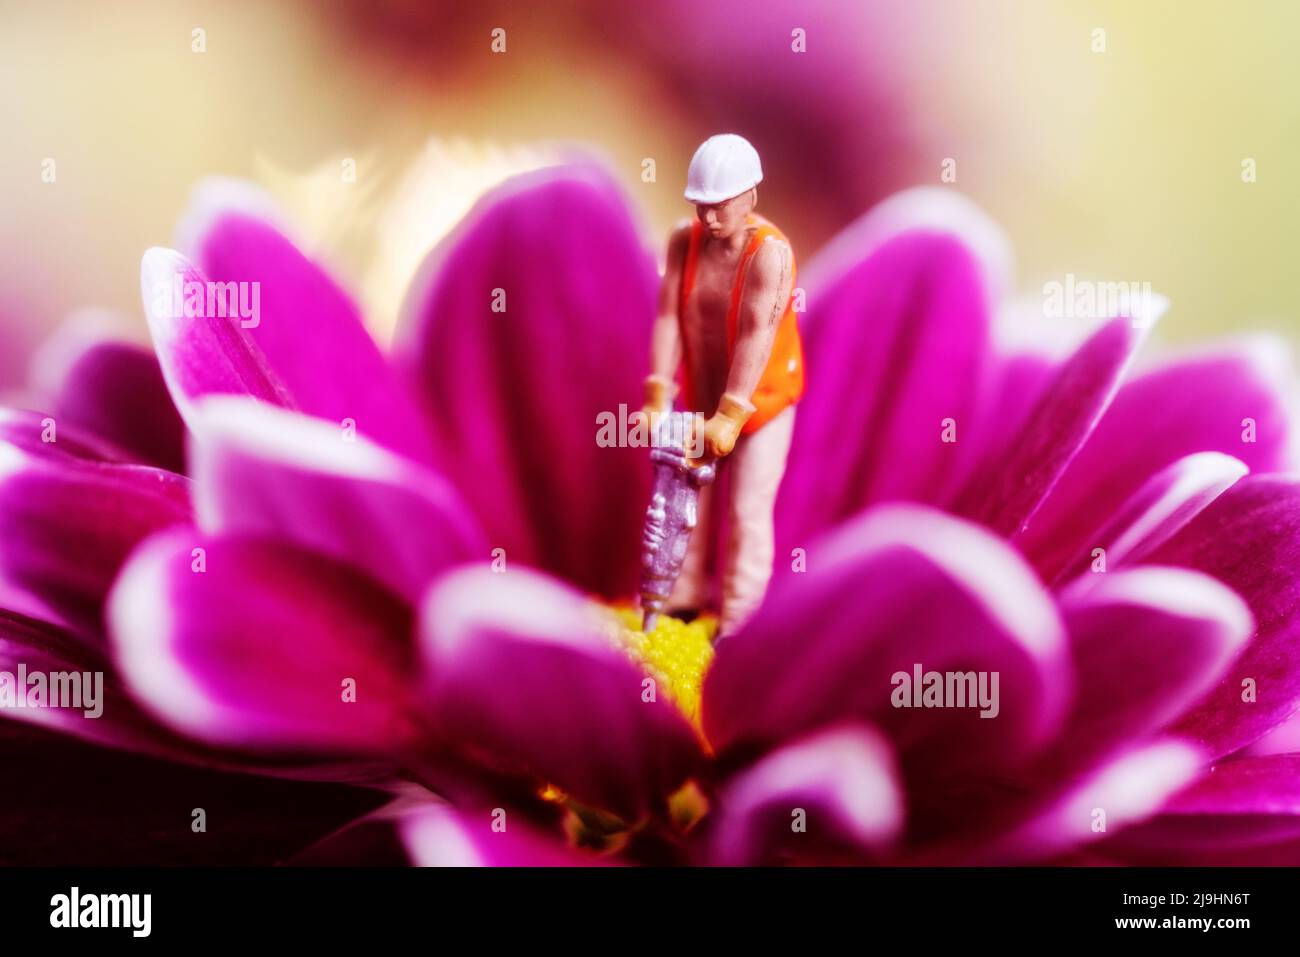 Blooming flower head and figurine of construction worker symbolizing destruction of nature Stock Photo